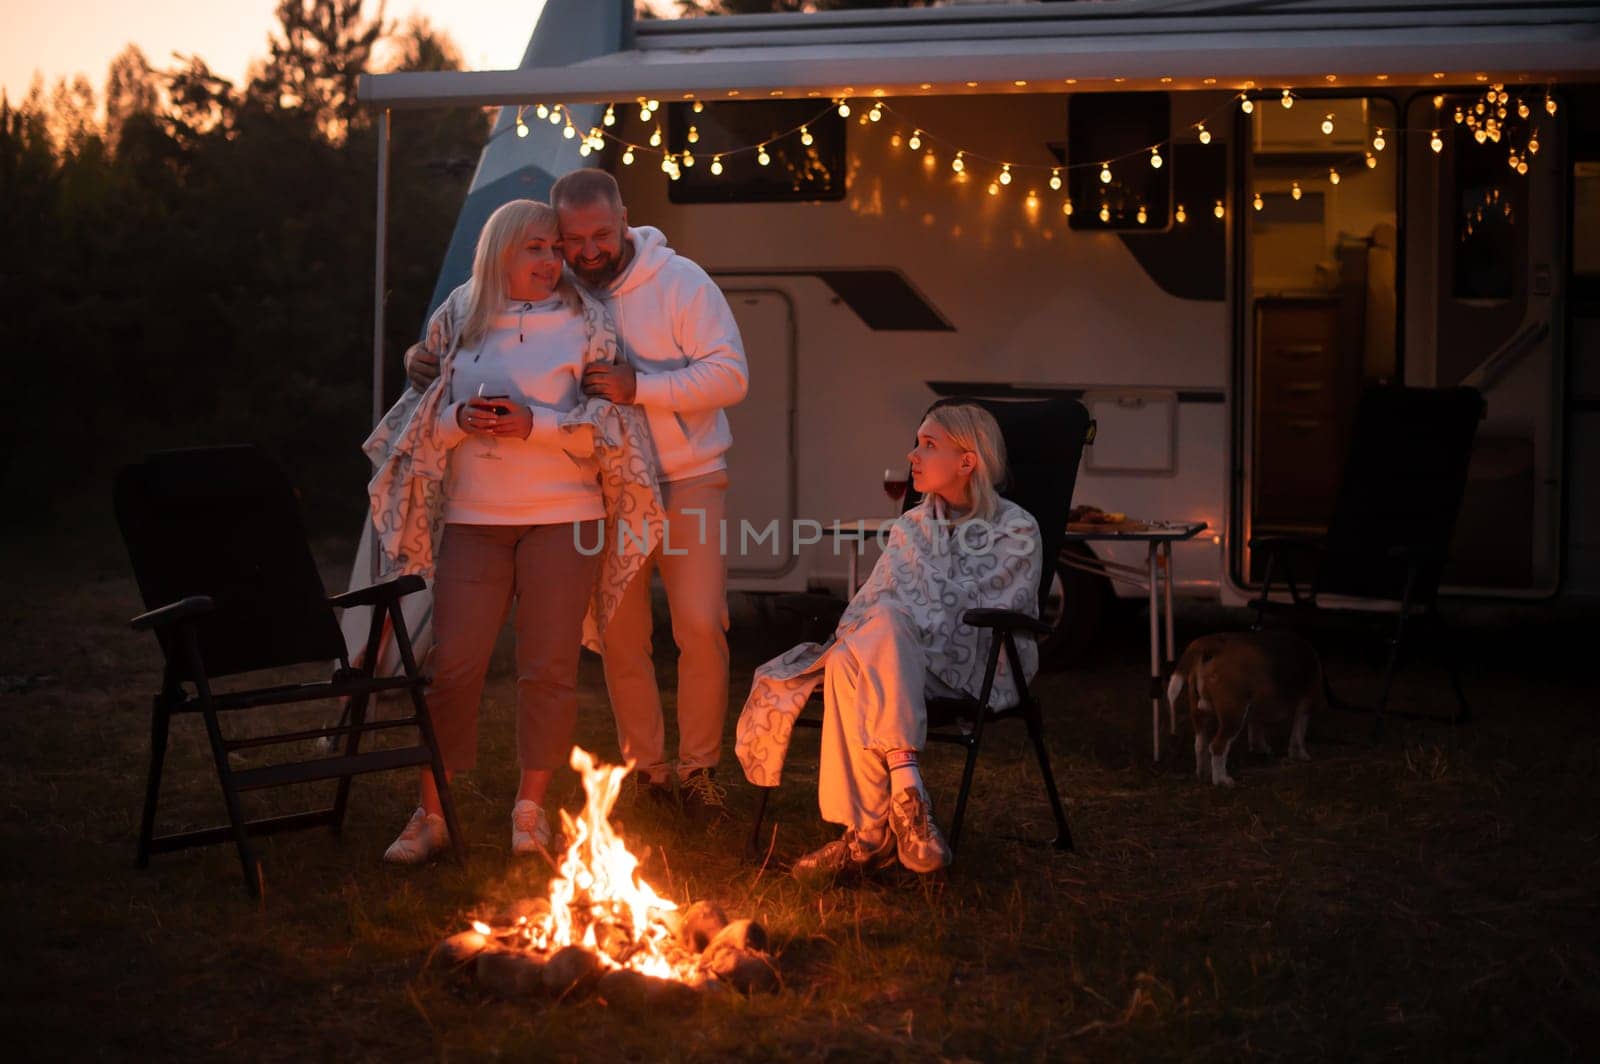 The family is relaxing together by the campfire near their mobile home. Evening family vacation.